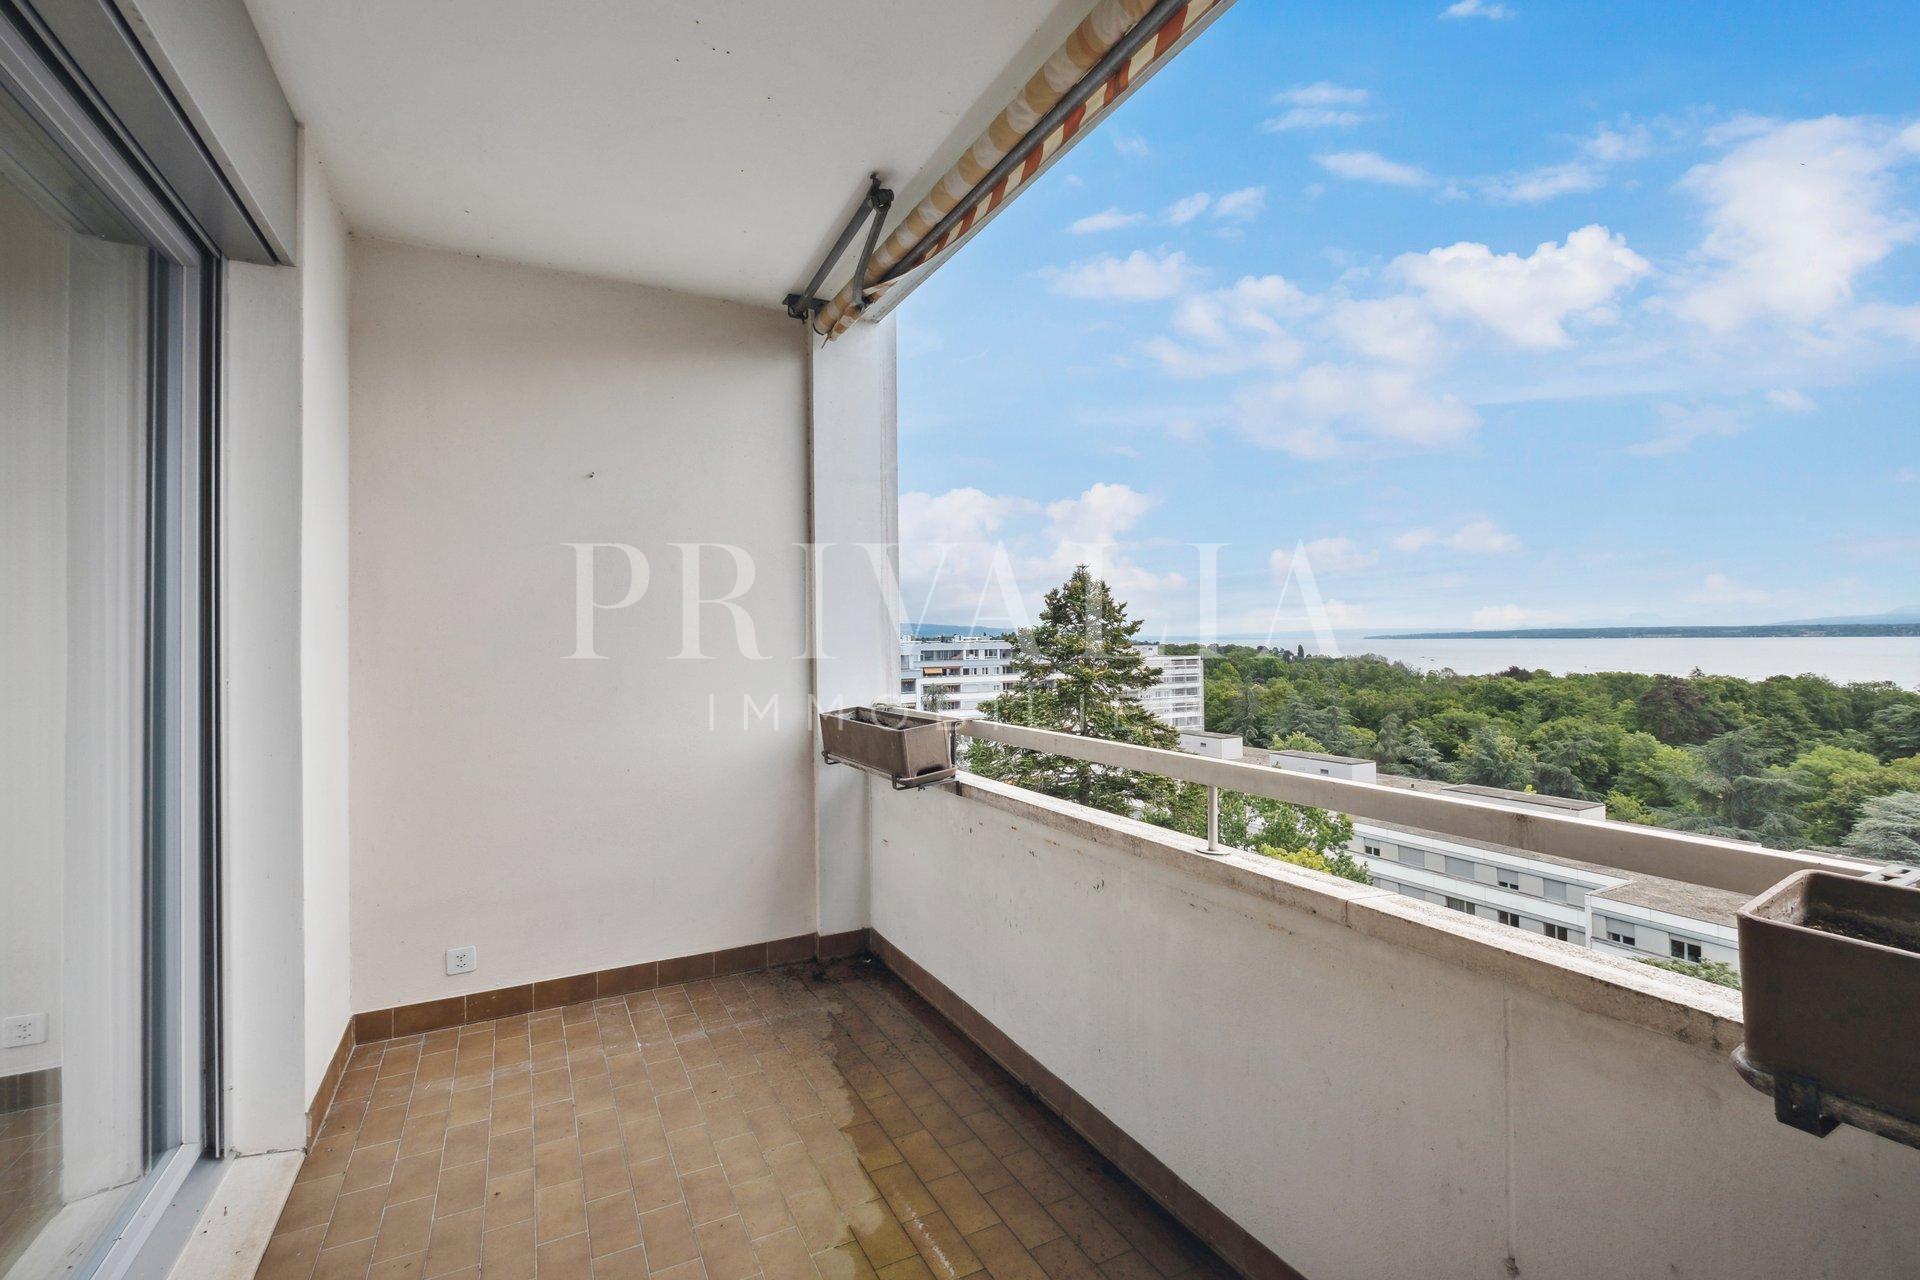 PrivaliaDuplex on the last floor with a terrace in Versoix